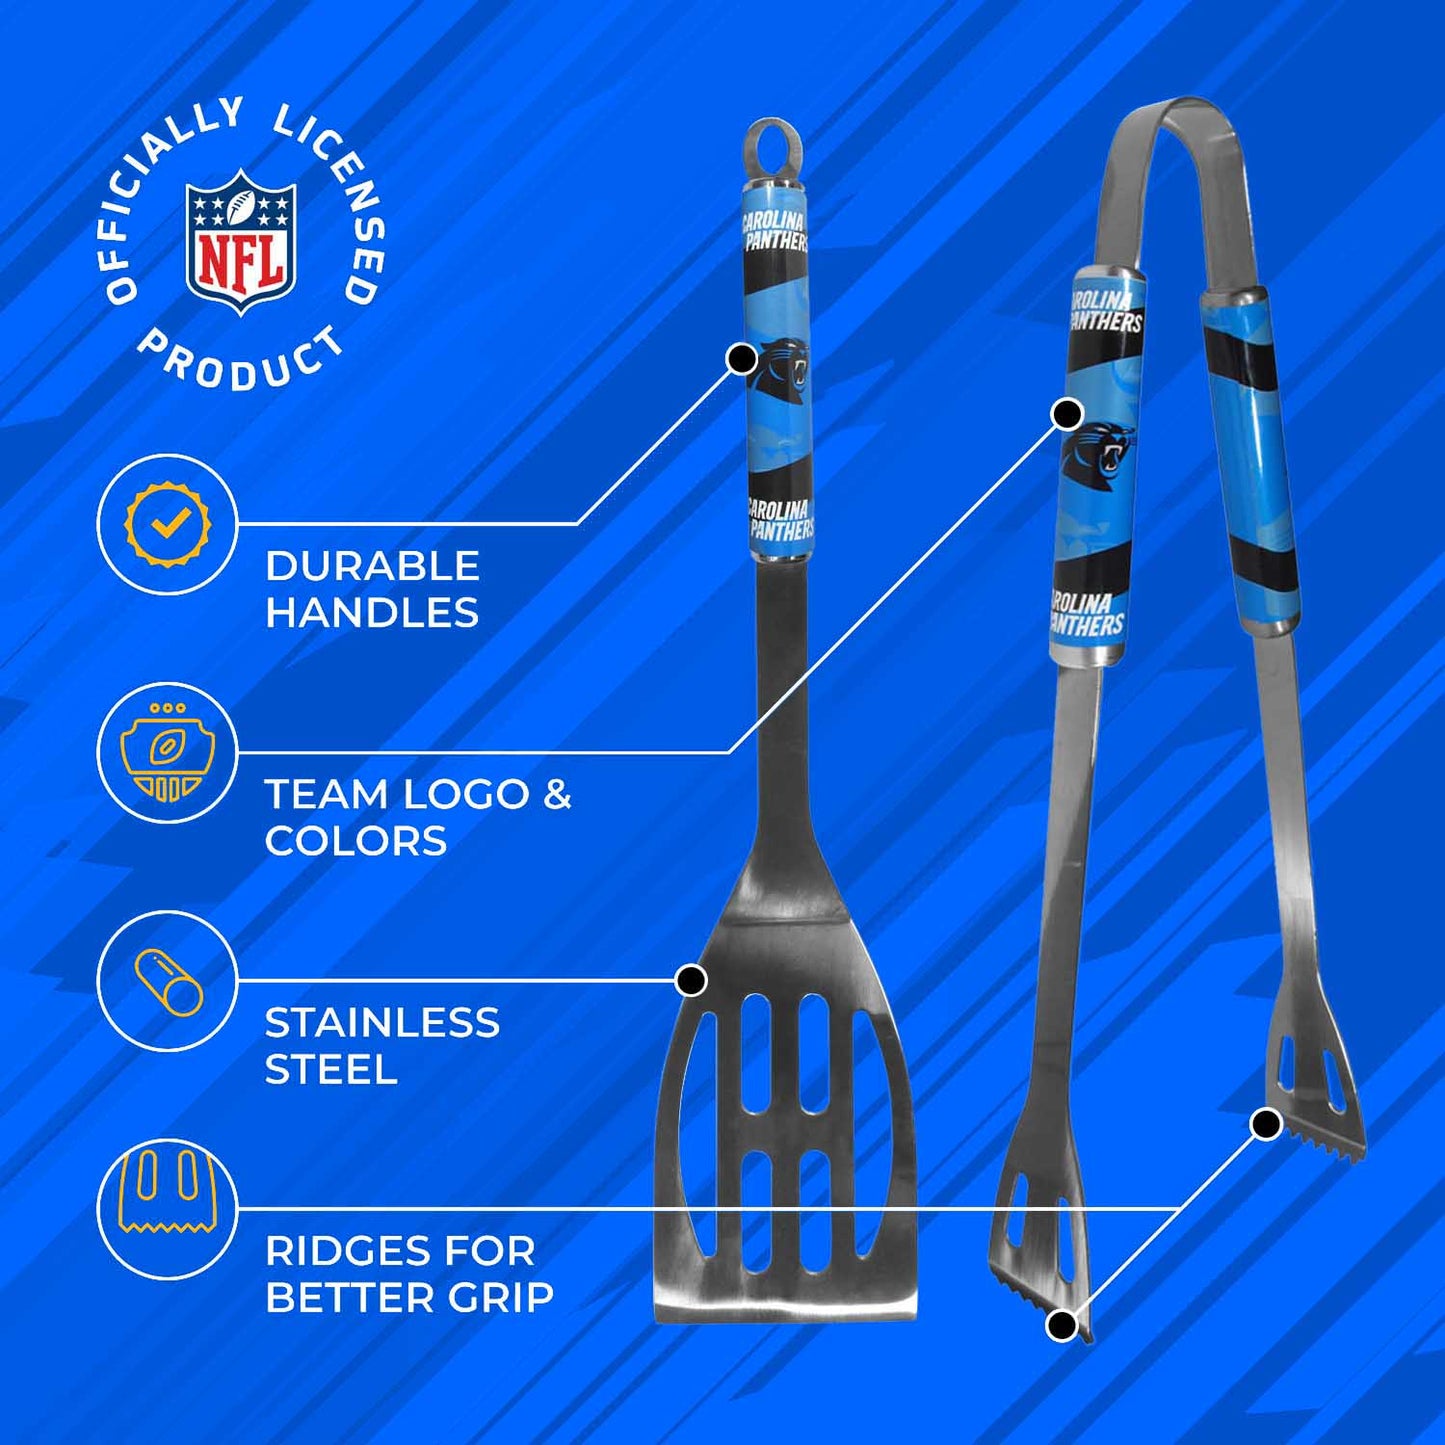 Carolina Panthers NFL Two Piece Grilling Tools Set with 2 Magnet Chip Clips - Chrome